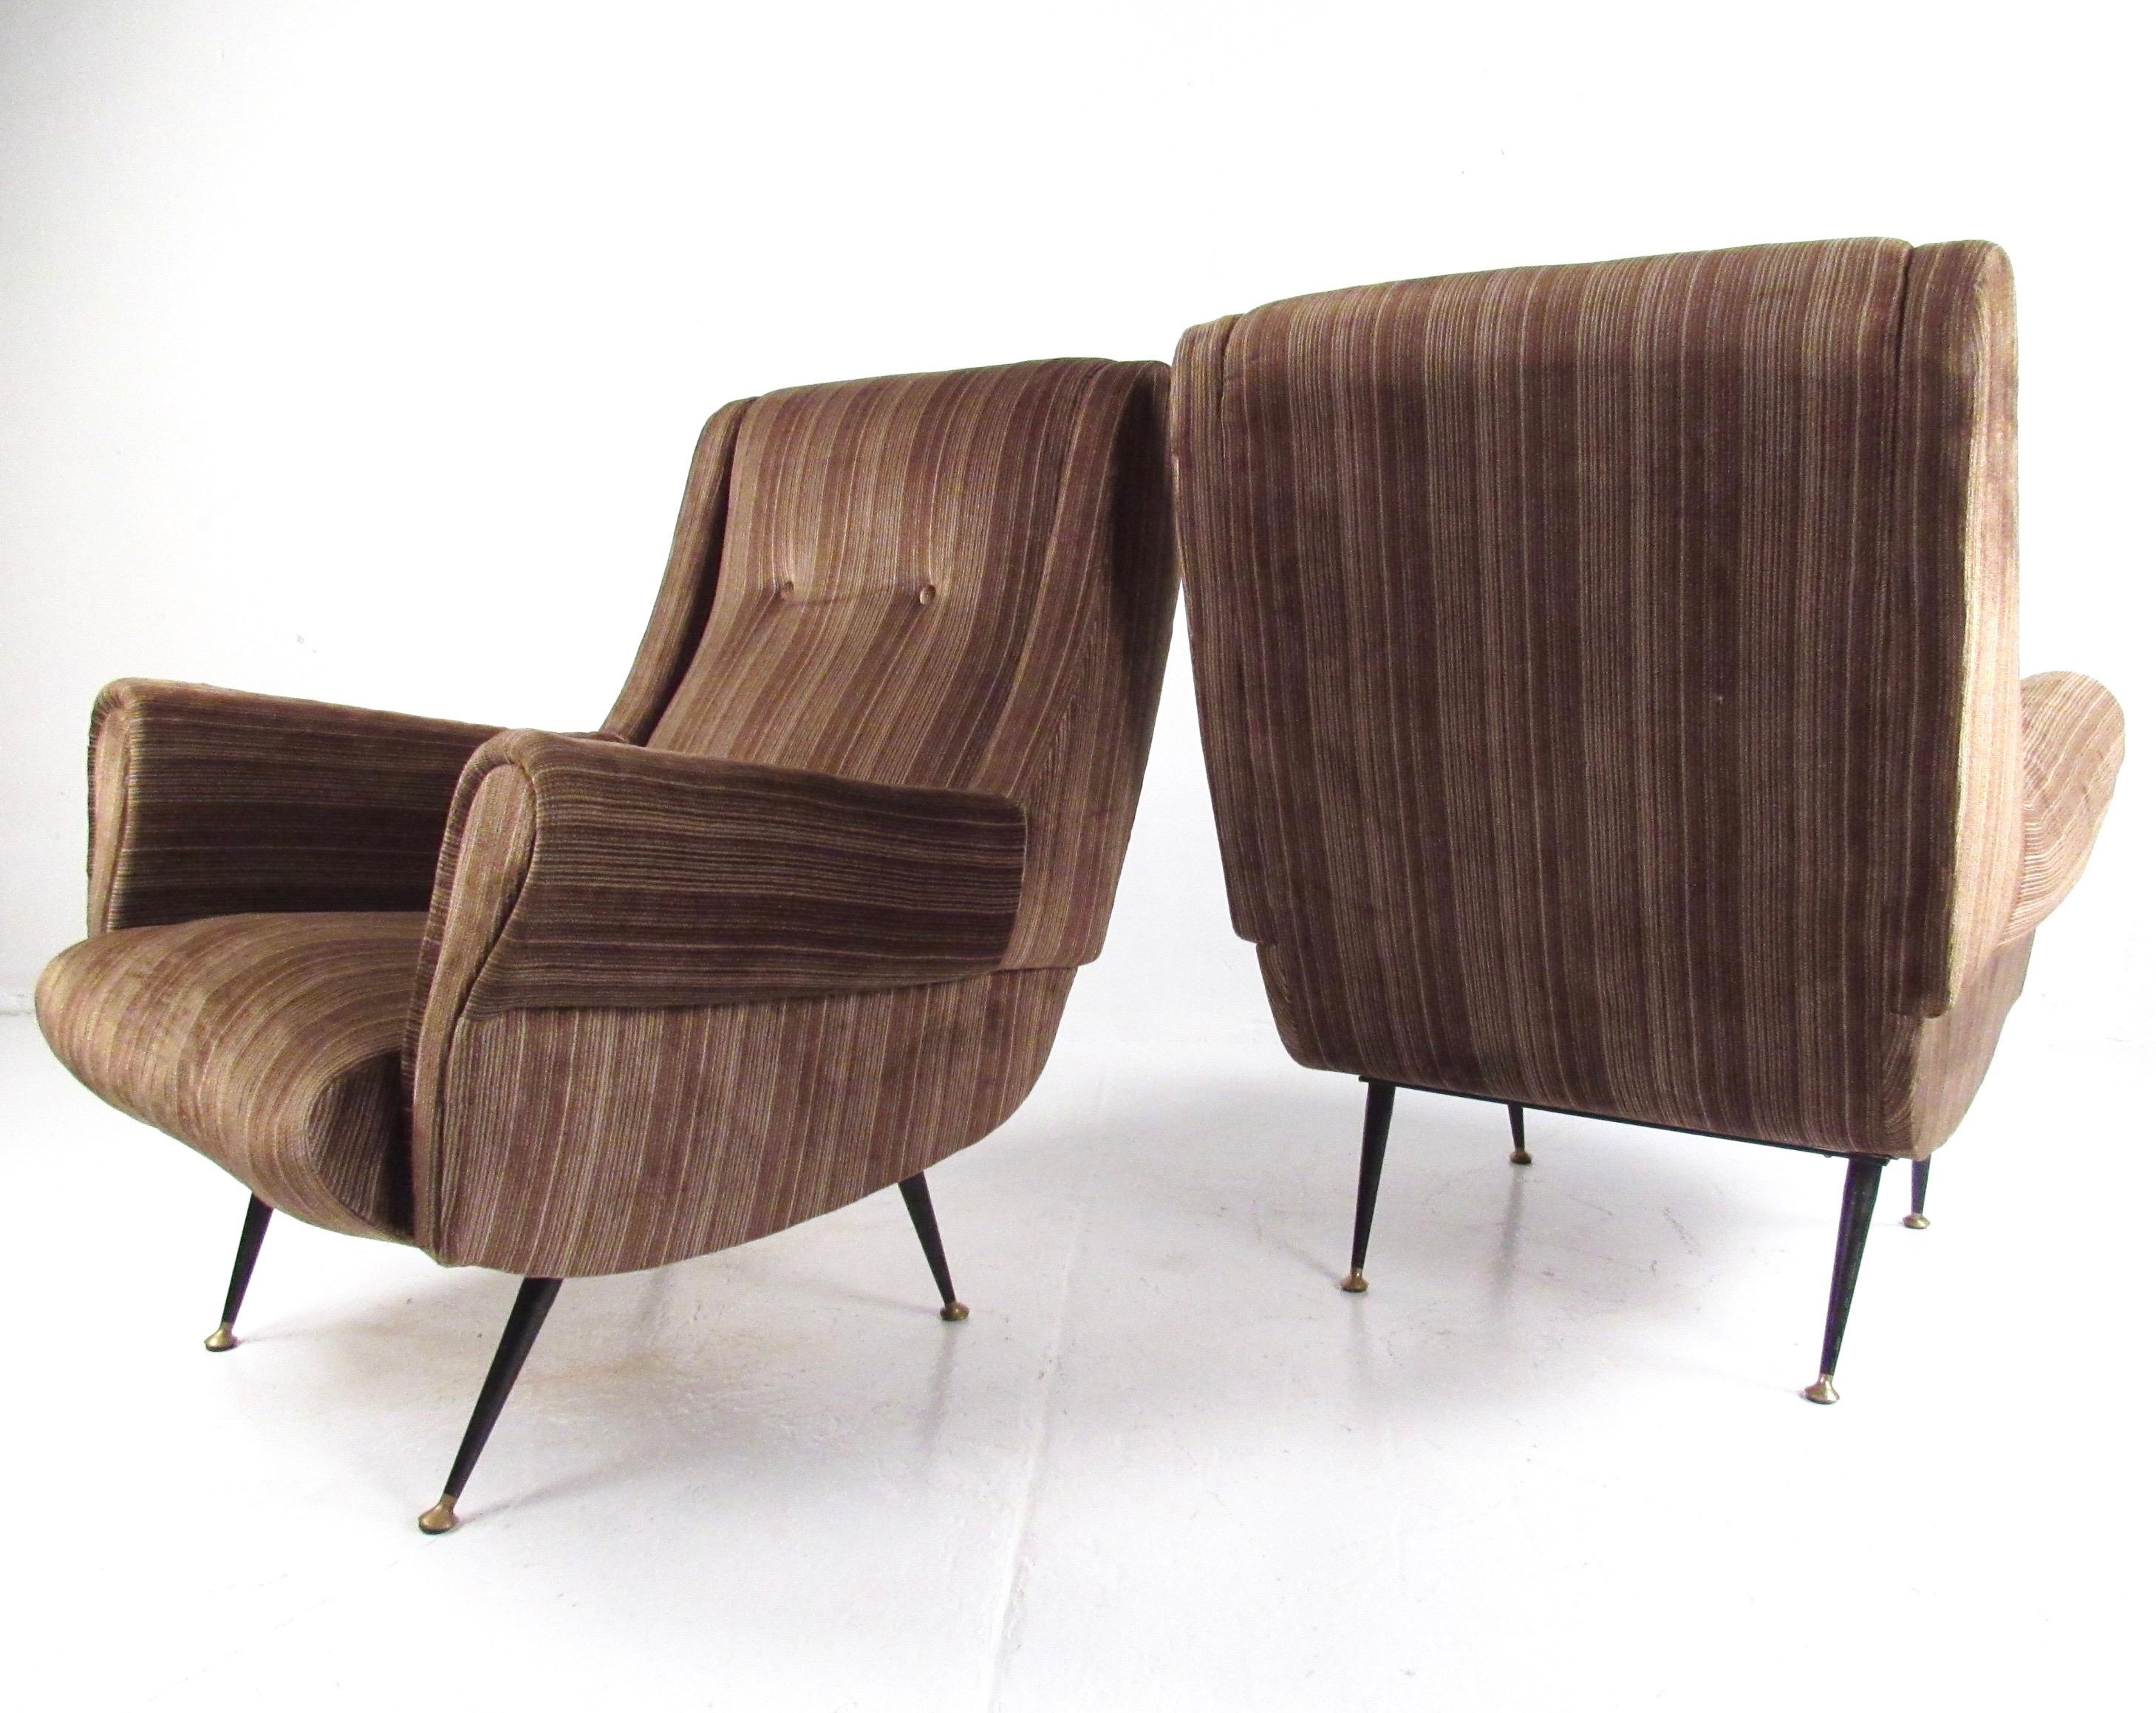 This striking pair of 1950s Italian modern lounge chairs feature sturdy mid-century construction and unique tapered metal legs. The shapely sculptural design in the style of Gigi Radice is complimented by the vintage upholstery. Please confirm item